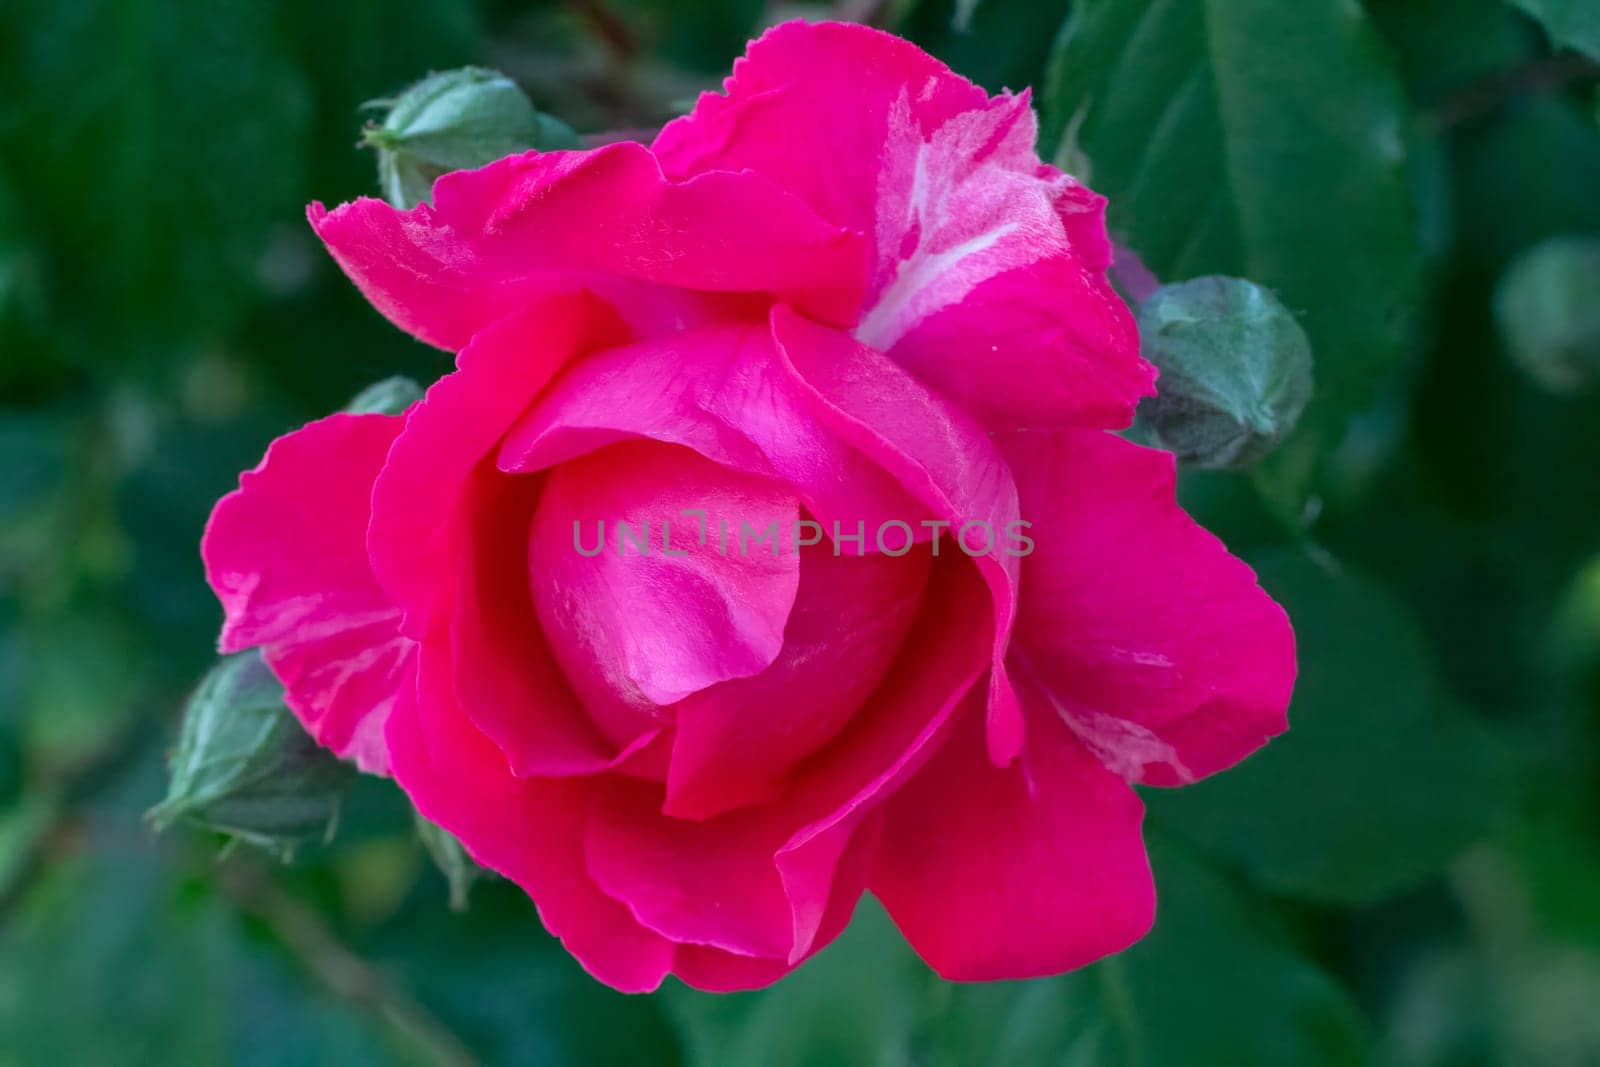 Close-up view of a red rose bud on the blurred natural background. Shallow depth of field.